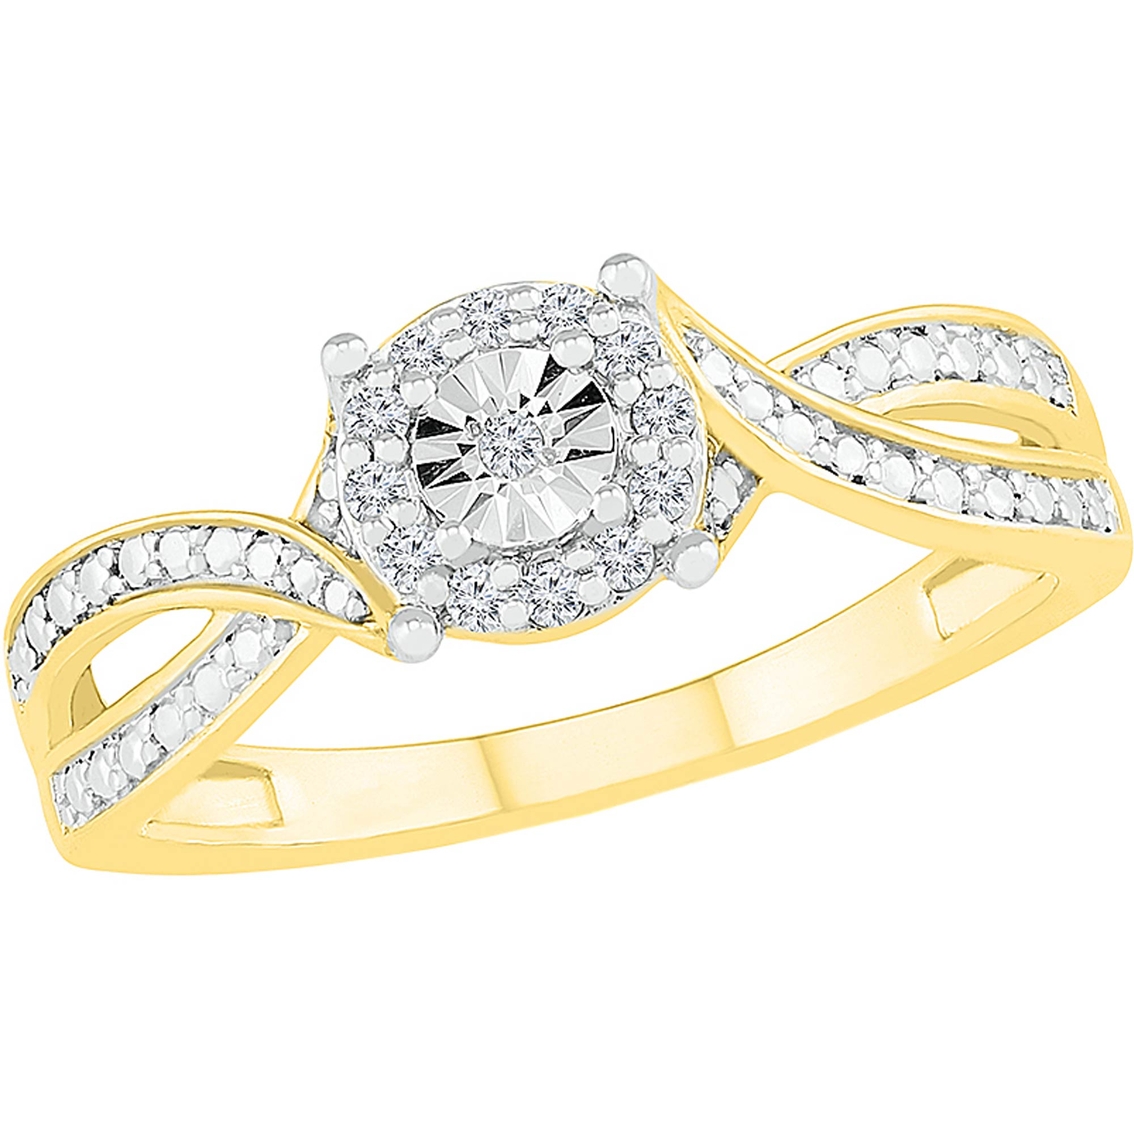 10K Gold Diamond Accent Promise Ring - Image 2 of 2